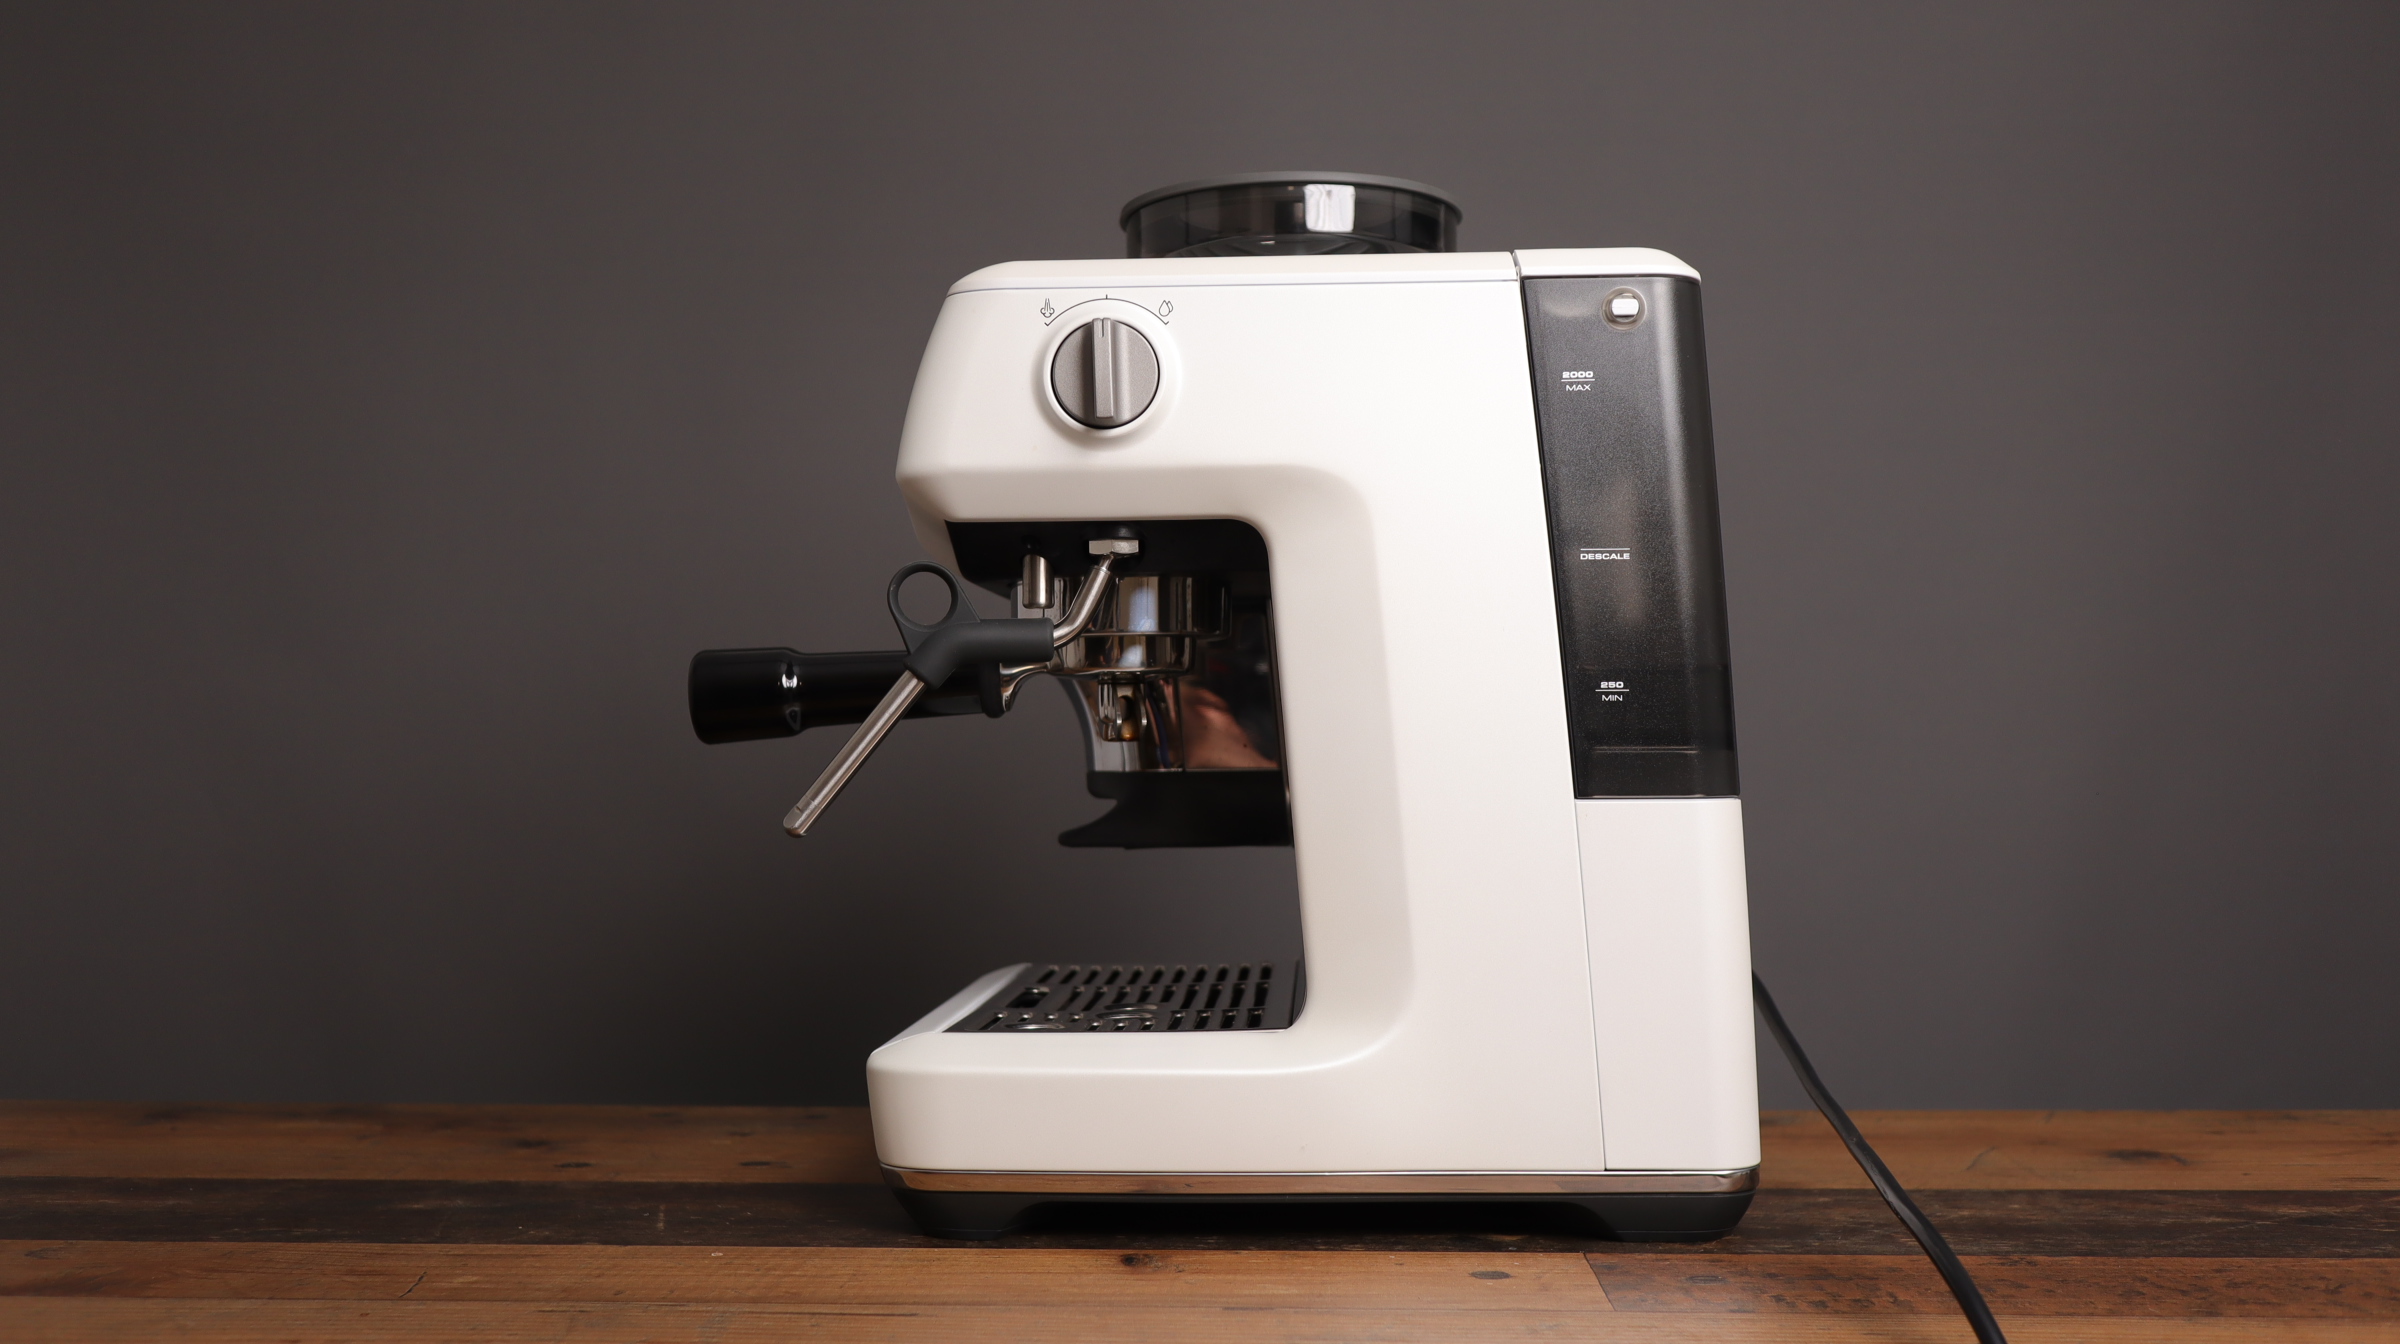 Right side view of Breville Barista Express Impress with steam lever and wand